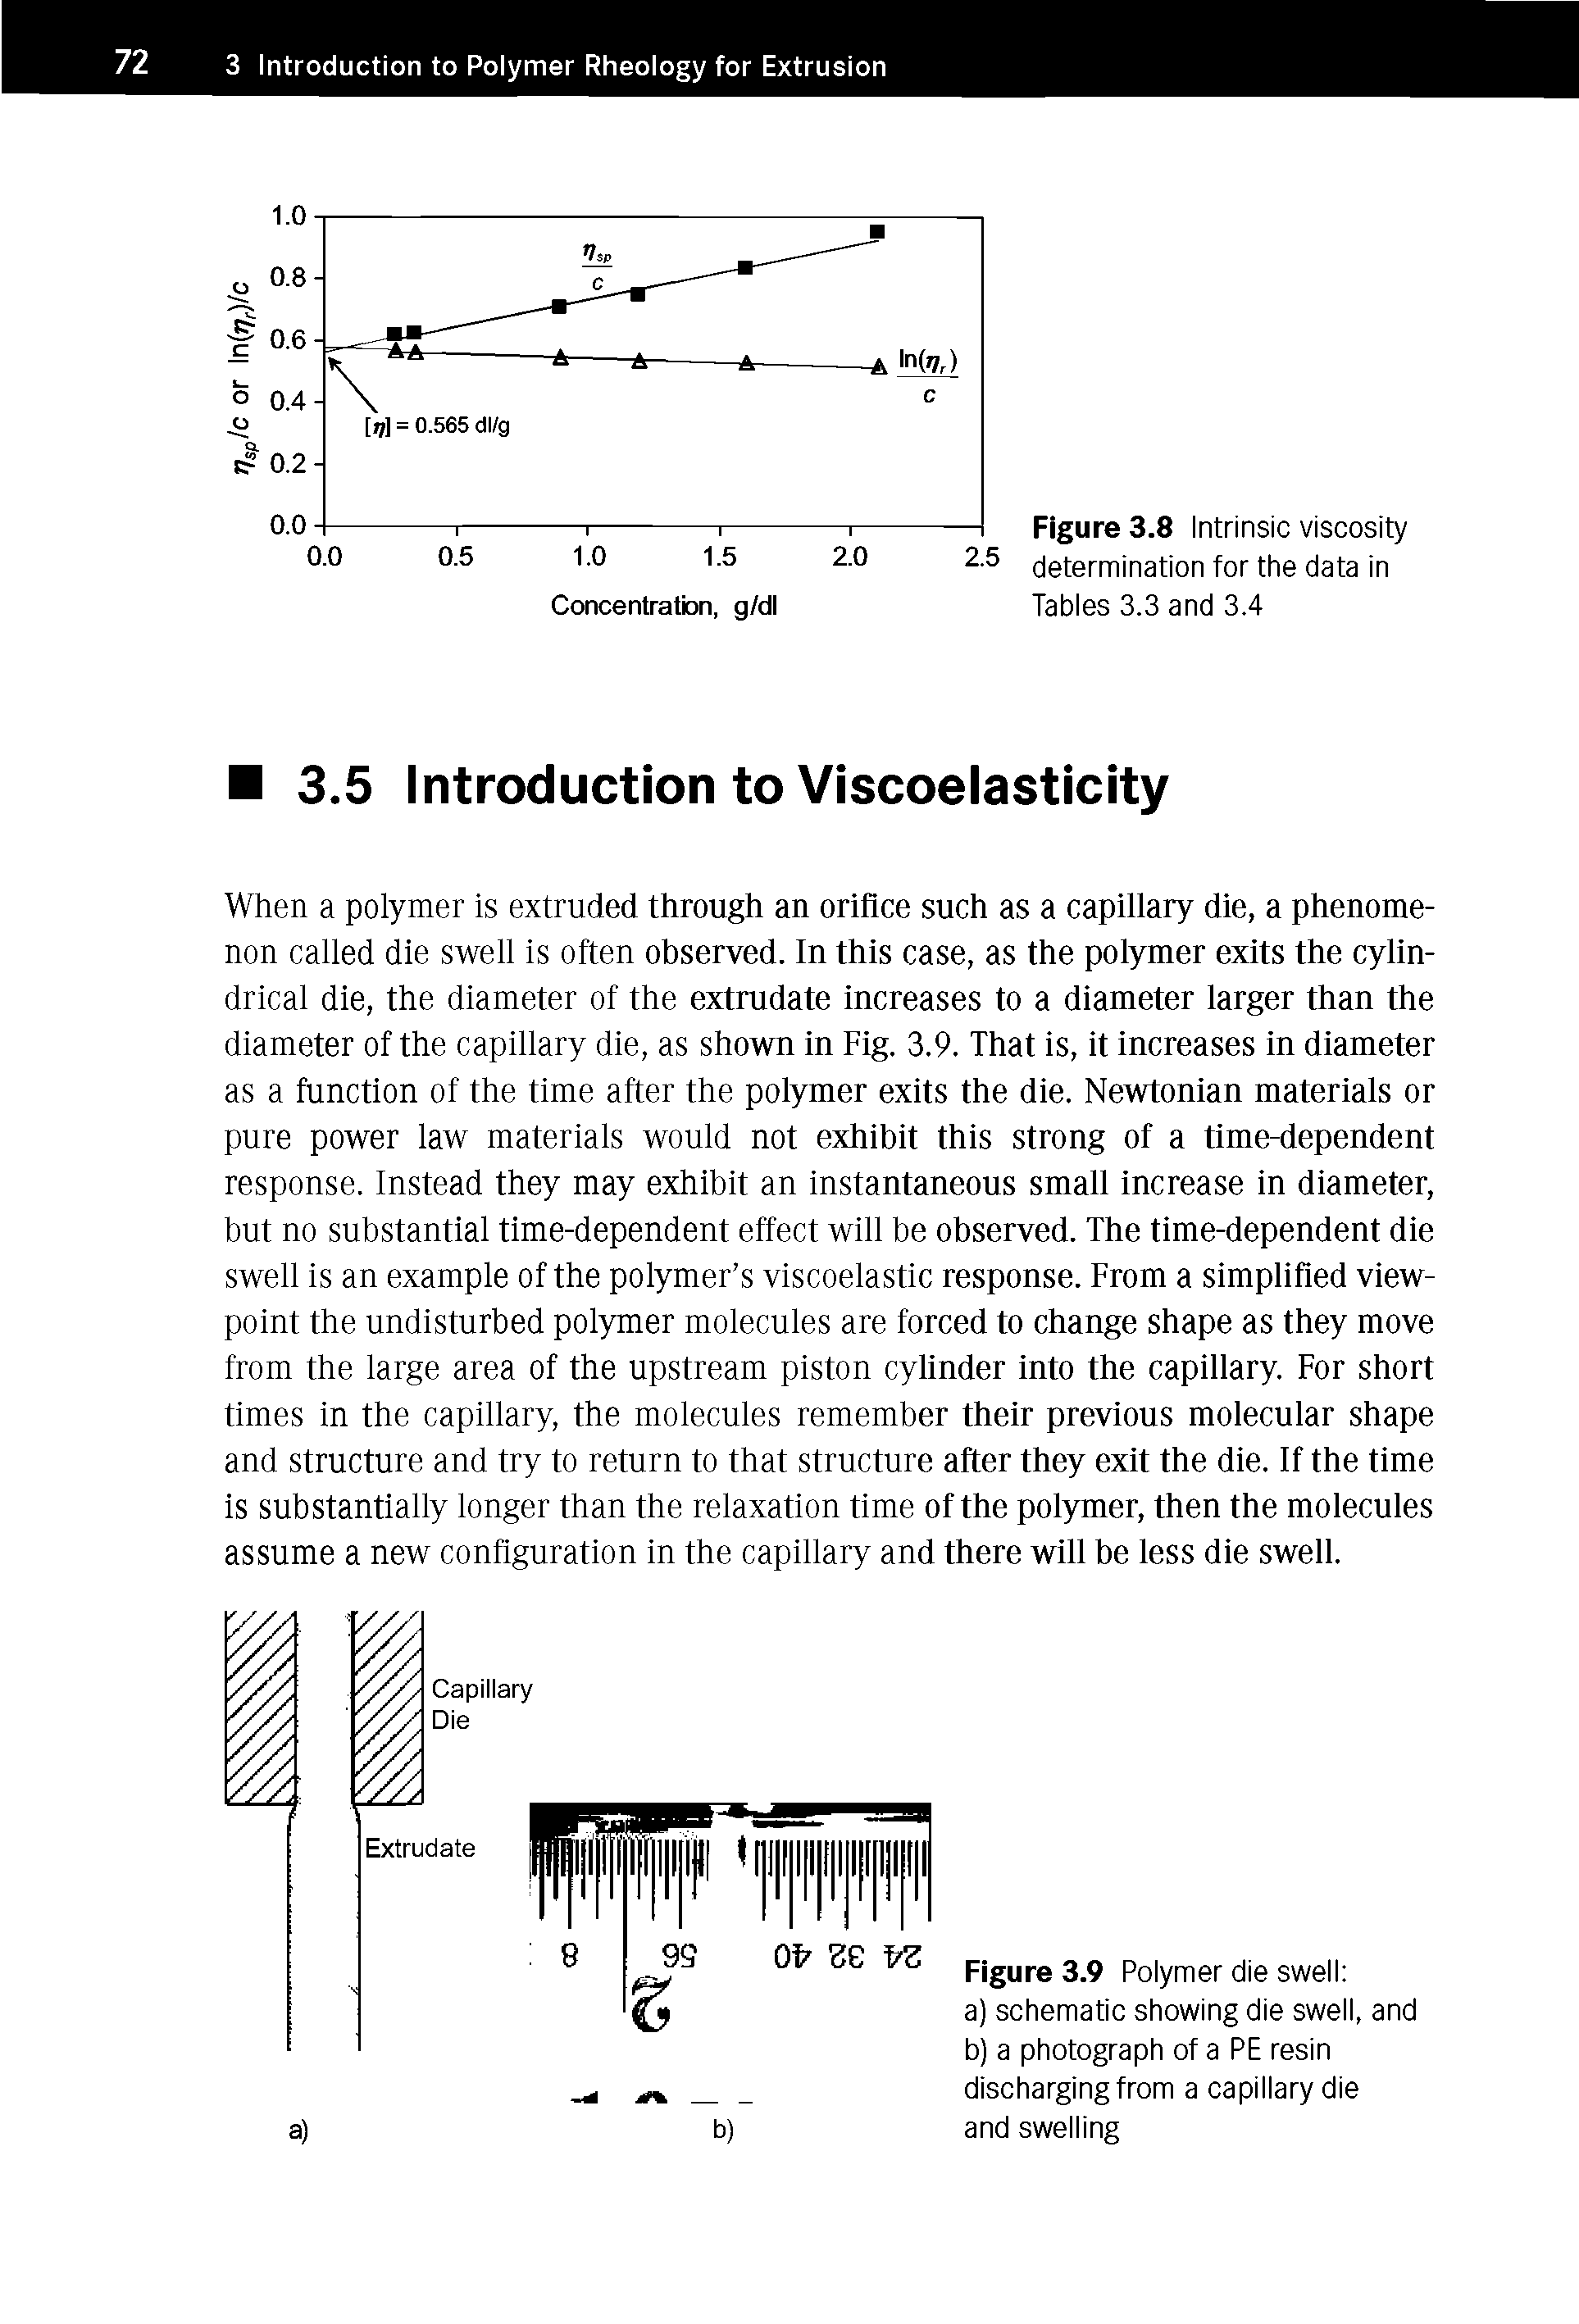 Figure 3.8 Intrinsic viscosity determination for the data in Tables 3.3 and 3.4...